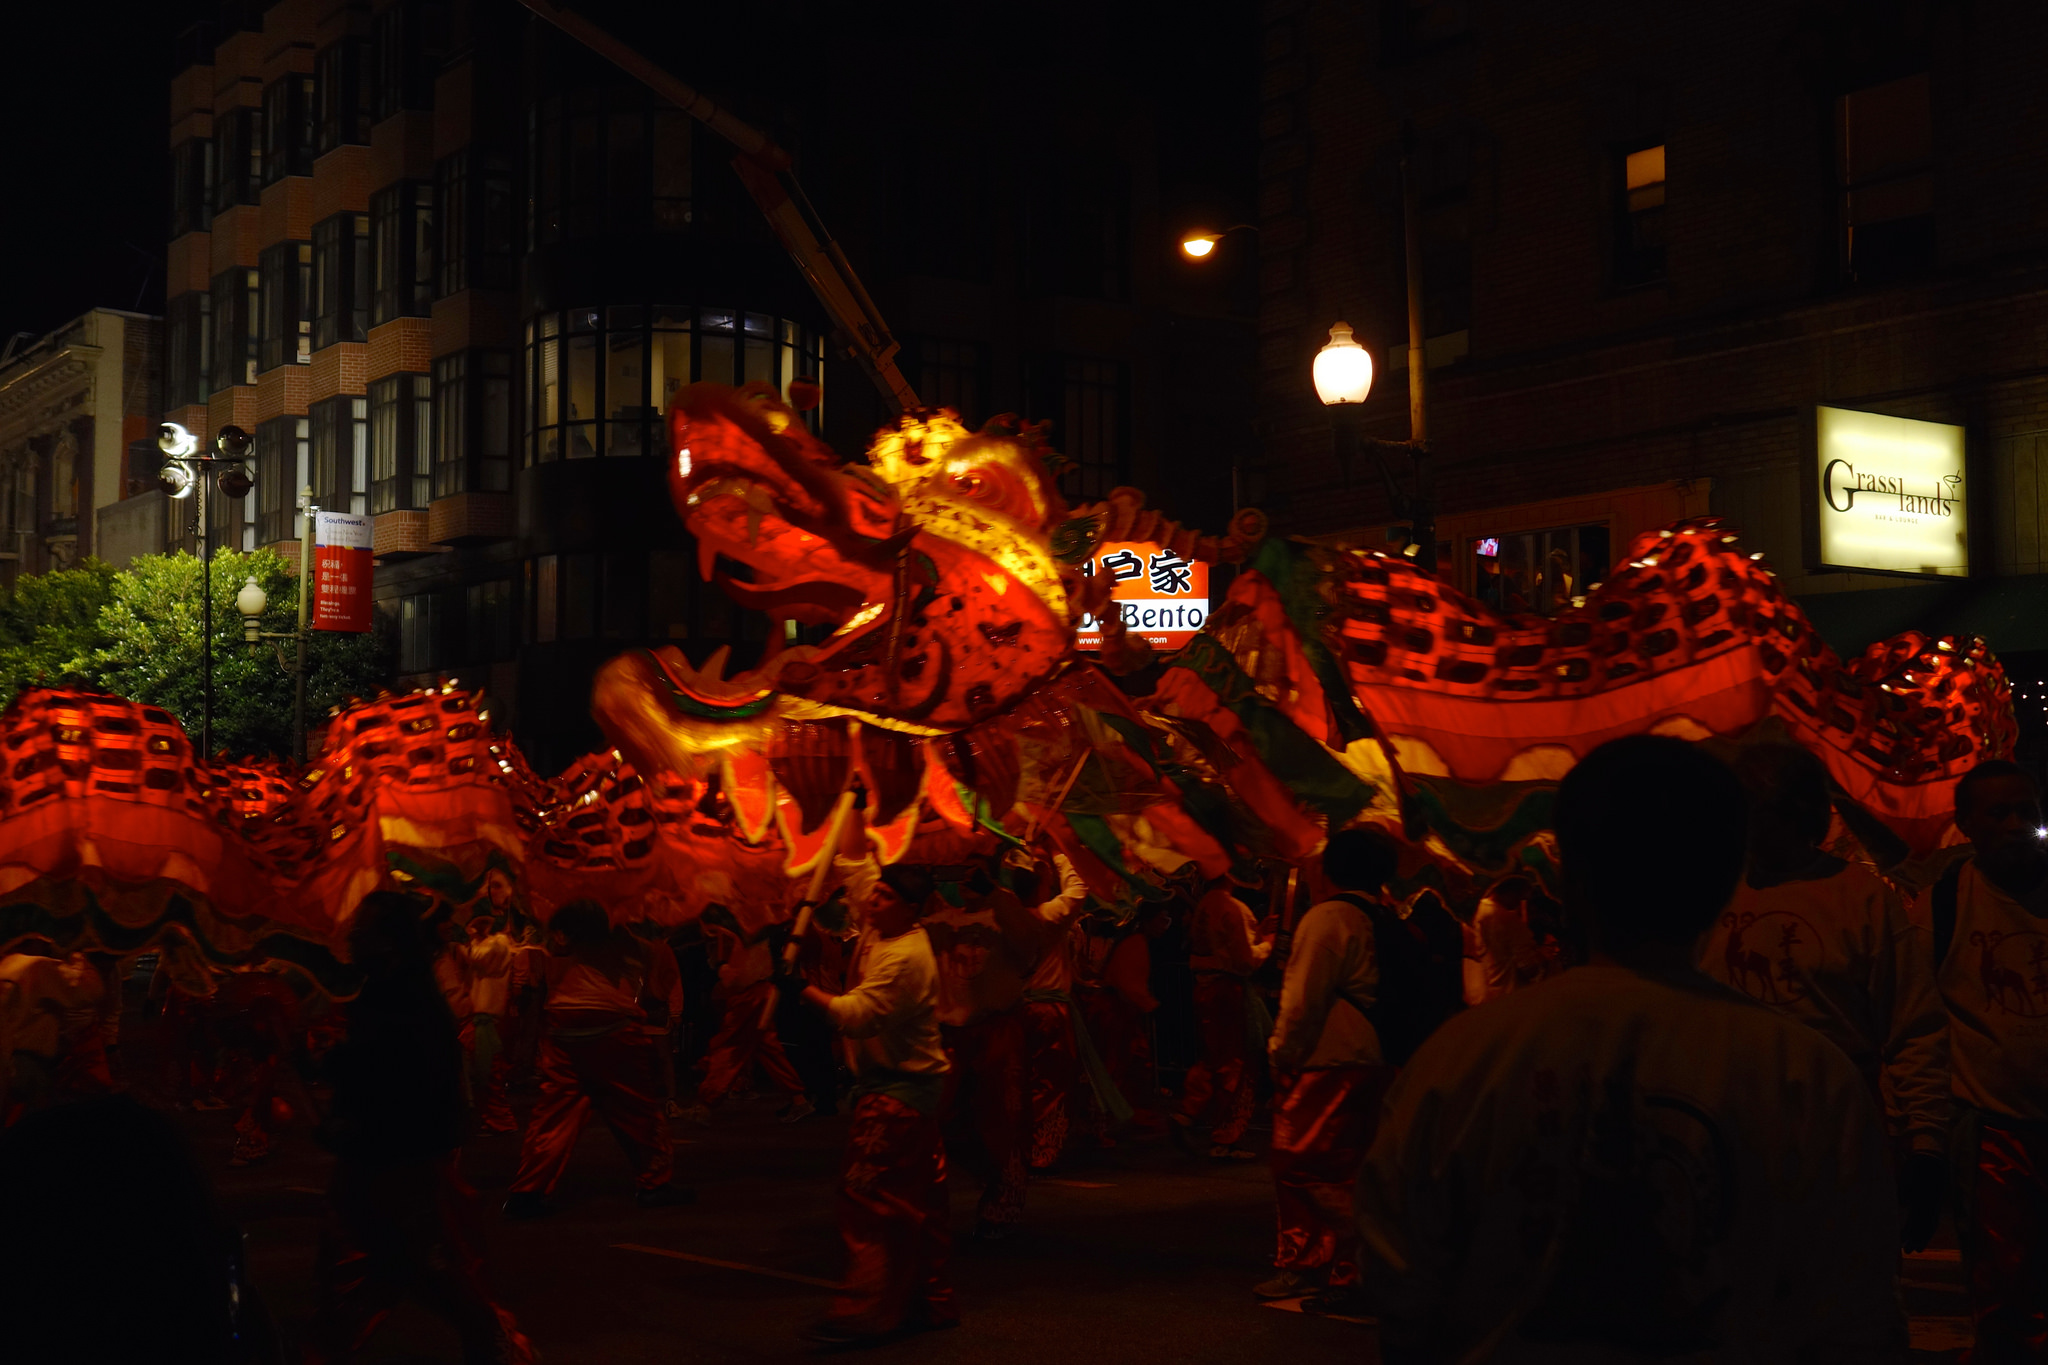 Nighttime image of a red, orange and yellow Chinese dragon in the New Year Parade.